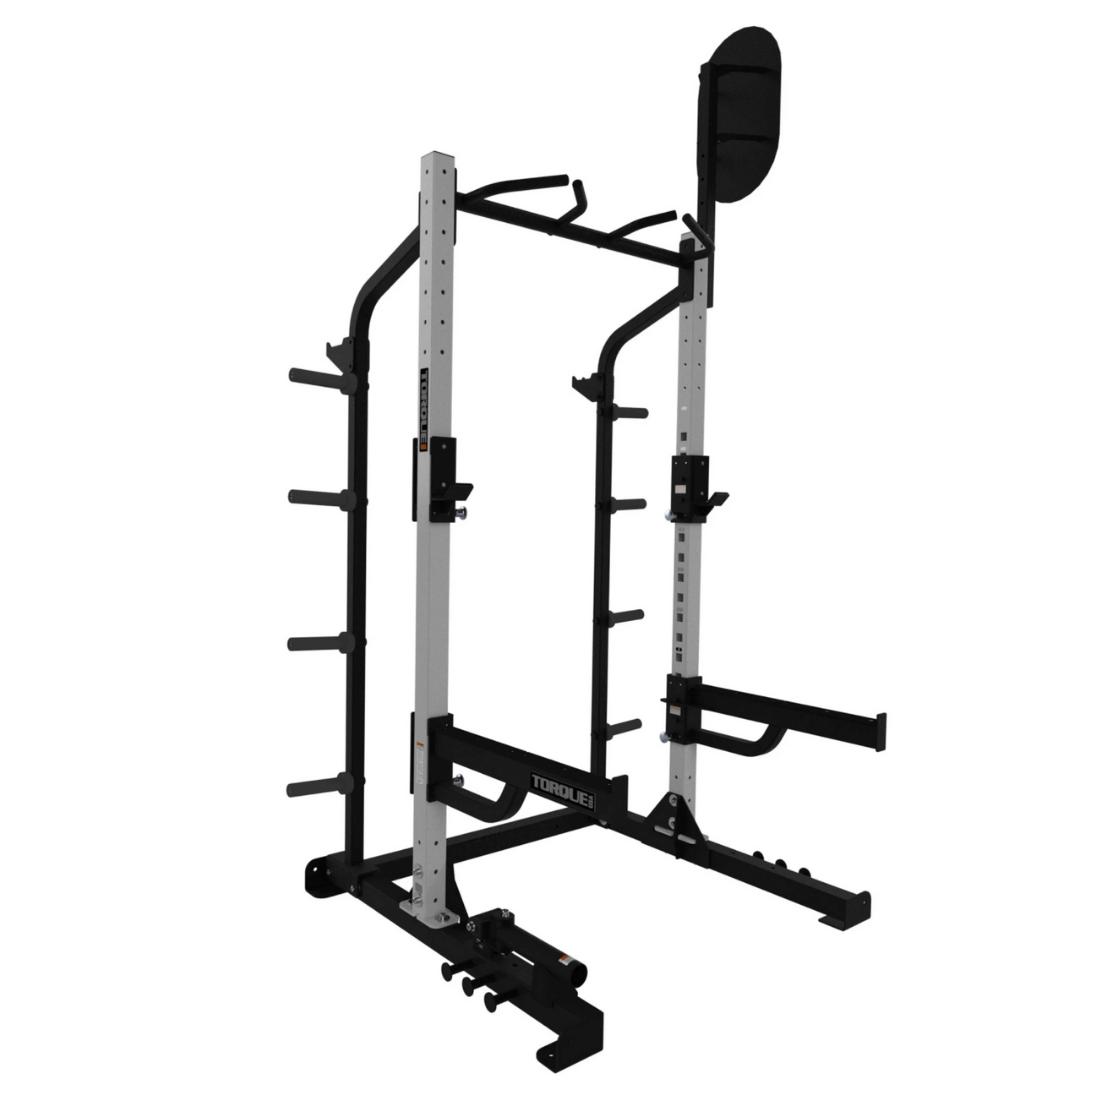 Torque Arsenal 8 Squat Rack - X1 Package - Competitors Outlet